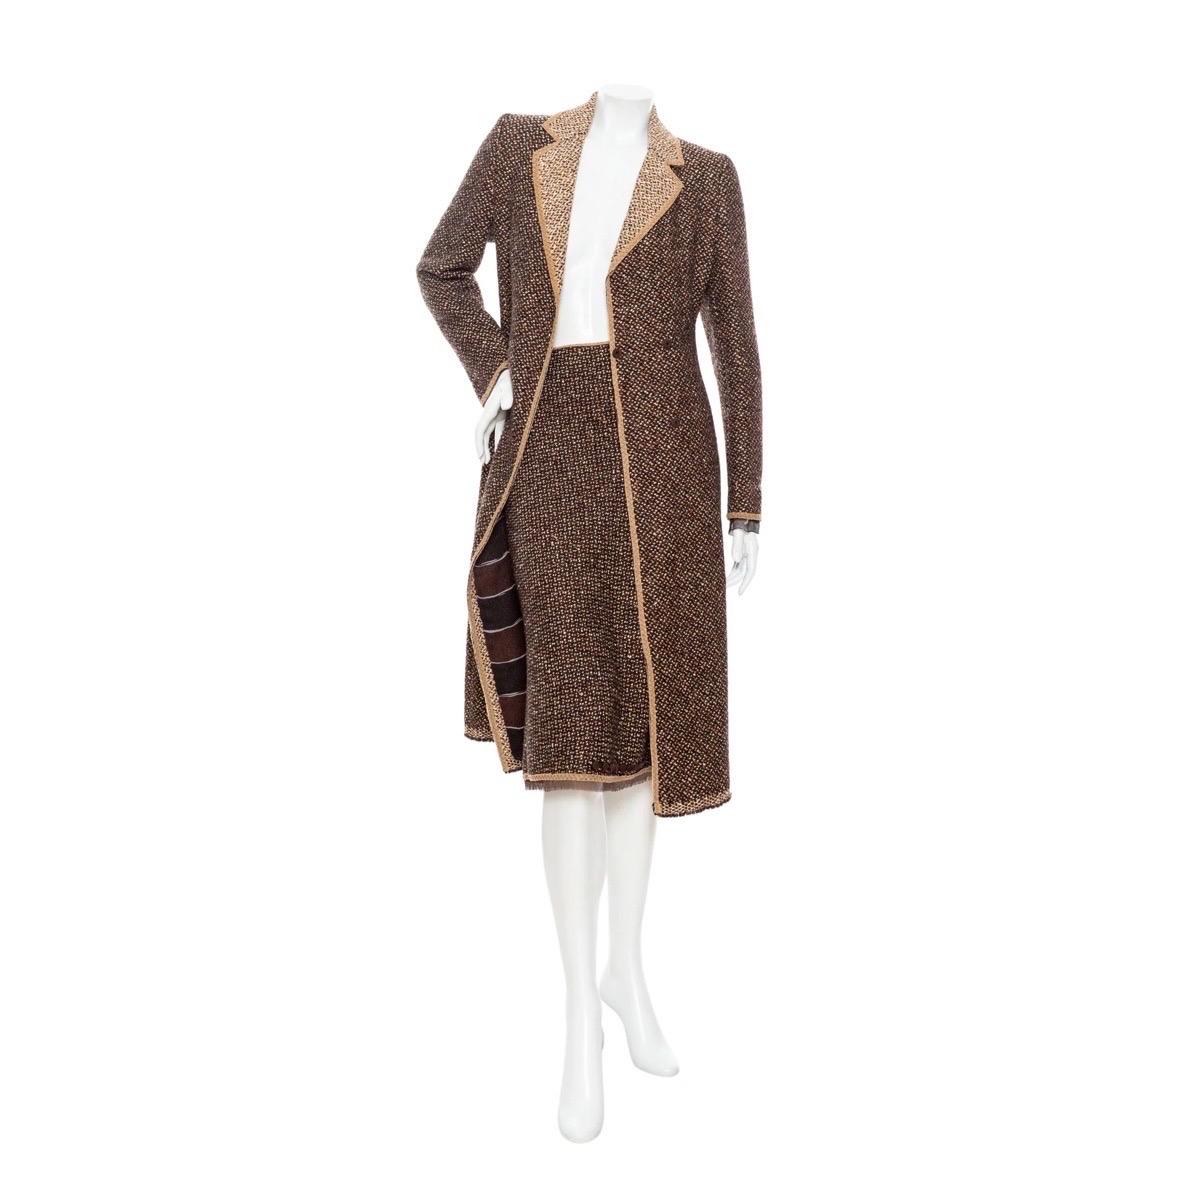 Prada Brown and Tan Virgin Wool Coat and Skirt Two-Piece Set

Matching pumps (size 38) in separate listing 

Two-piece set included coat and skirt
Brown/Tan/Black/White
Woven tweed patterning
Coat
Double breasted
Notched collar
Striped lining and